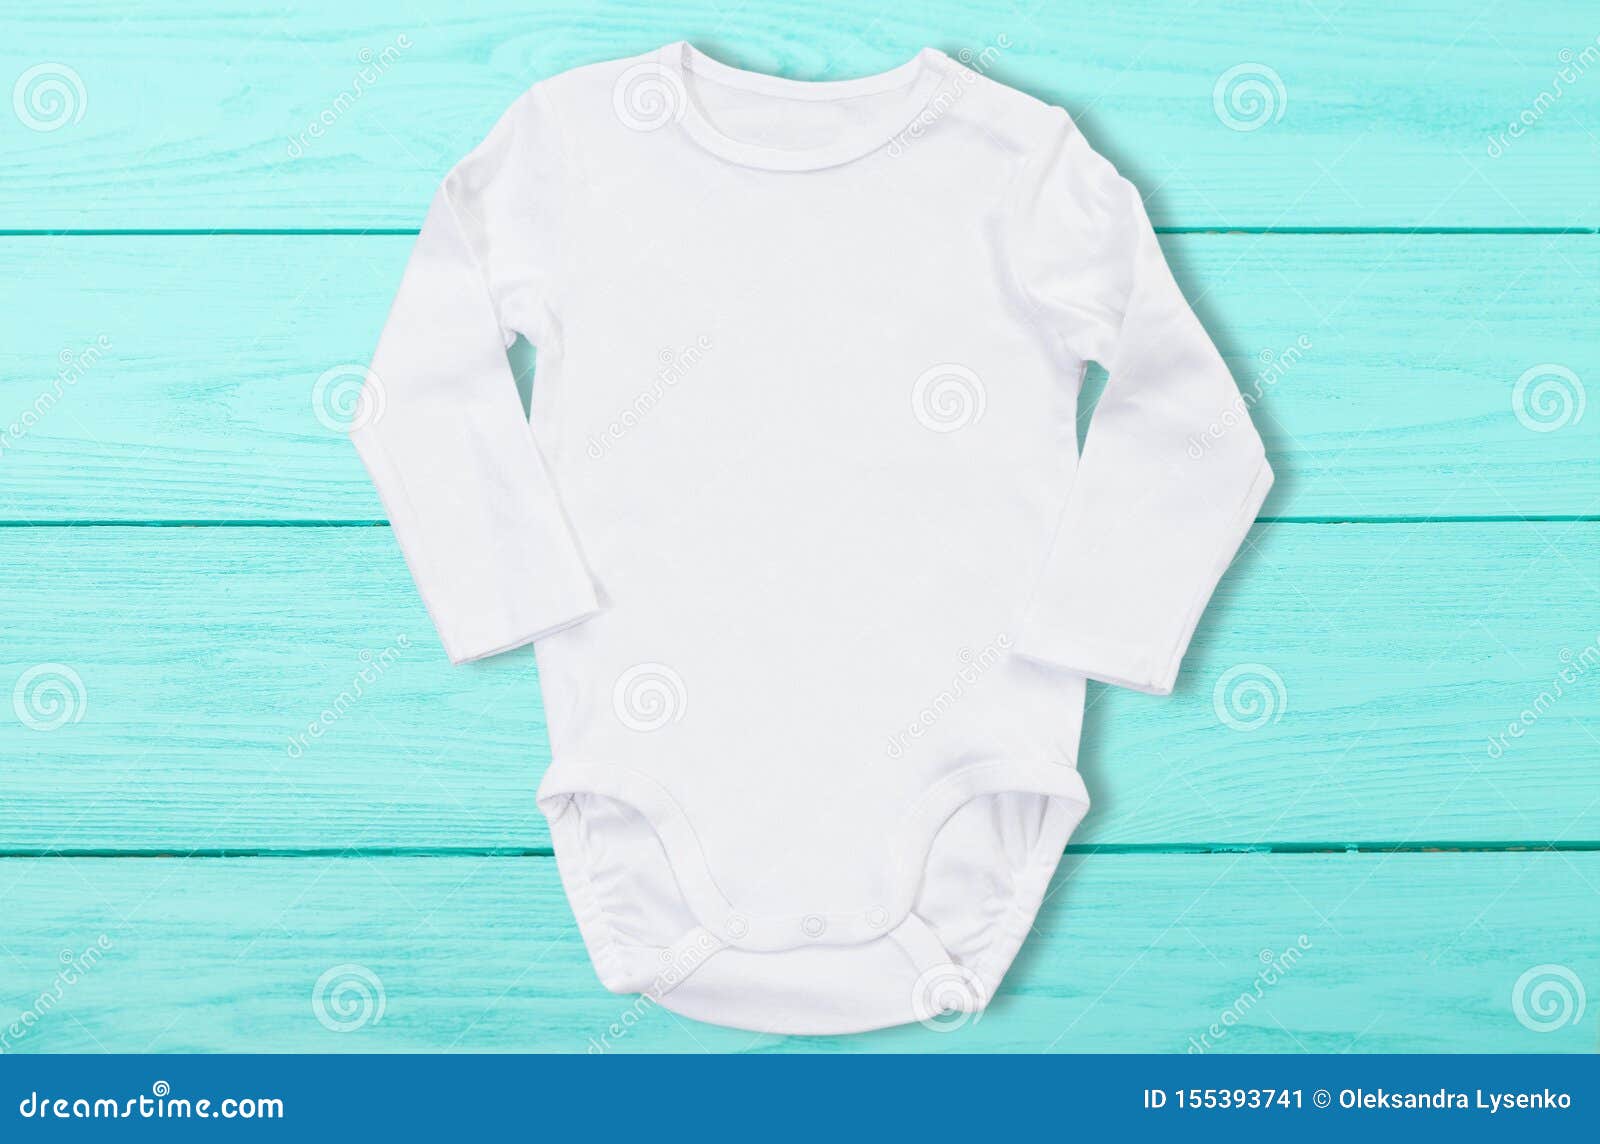 Download White Baby Mock Up Jumpsuit On Blue Wooden Background ...